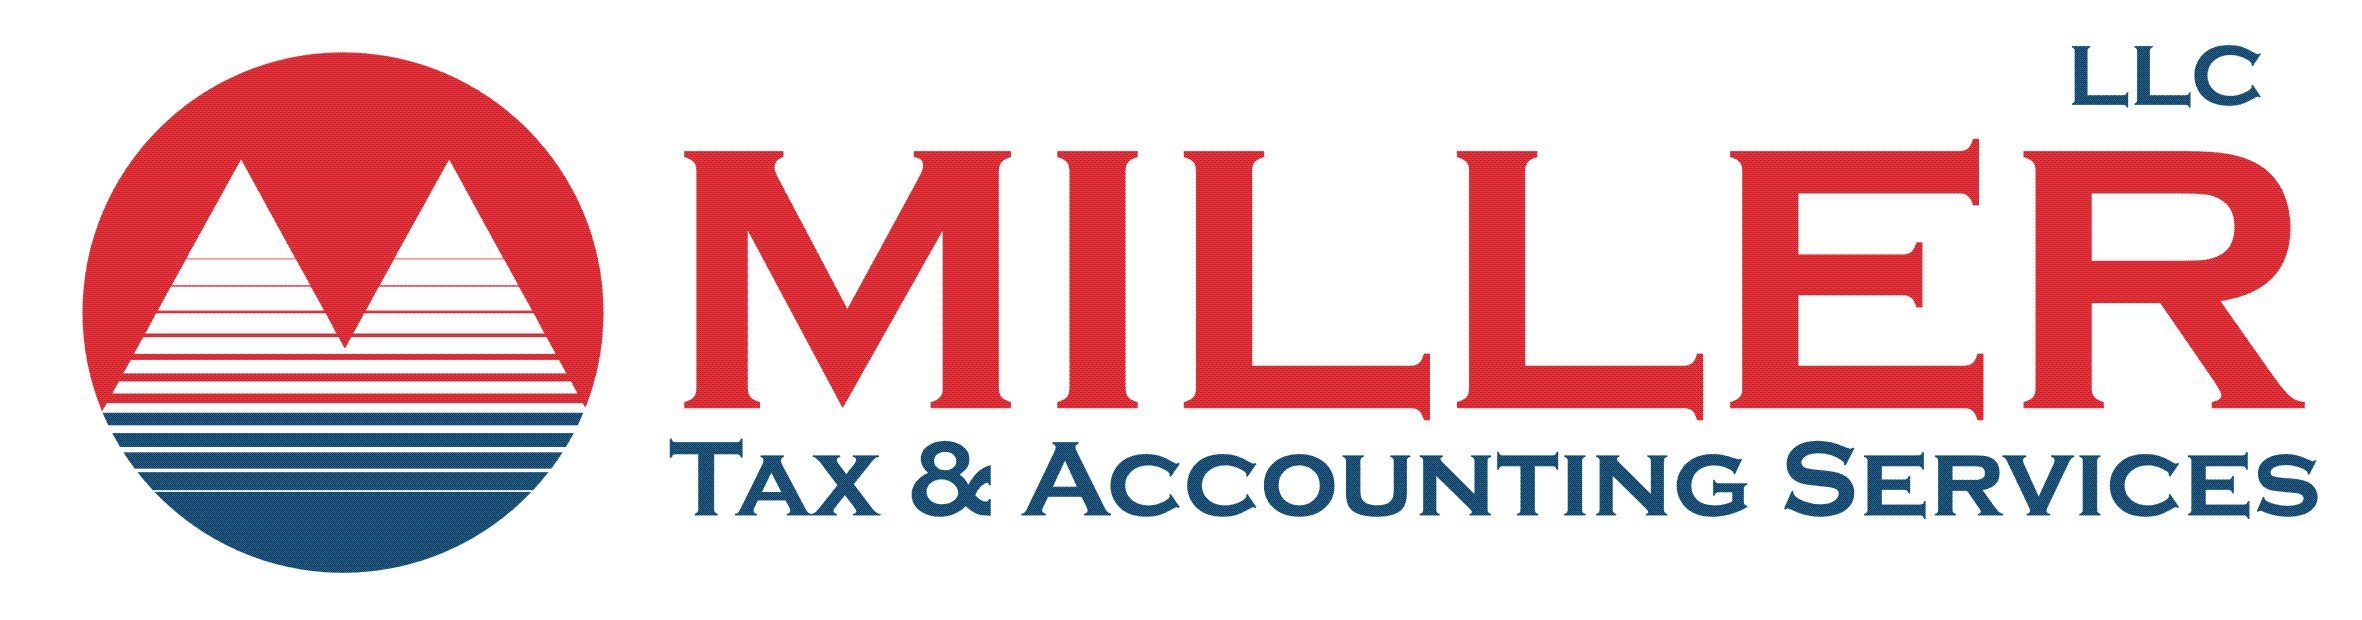 Miller Tax & Accounting Services, LLC